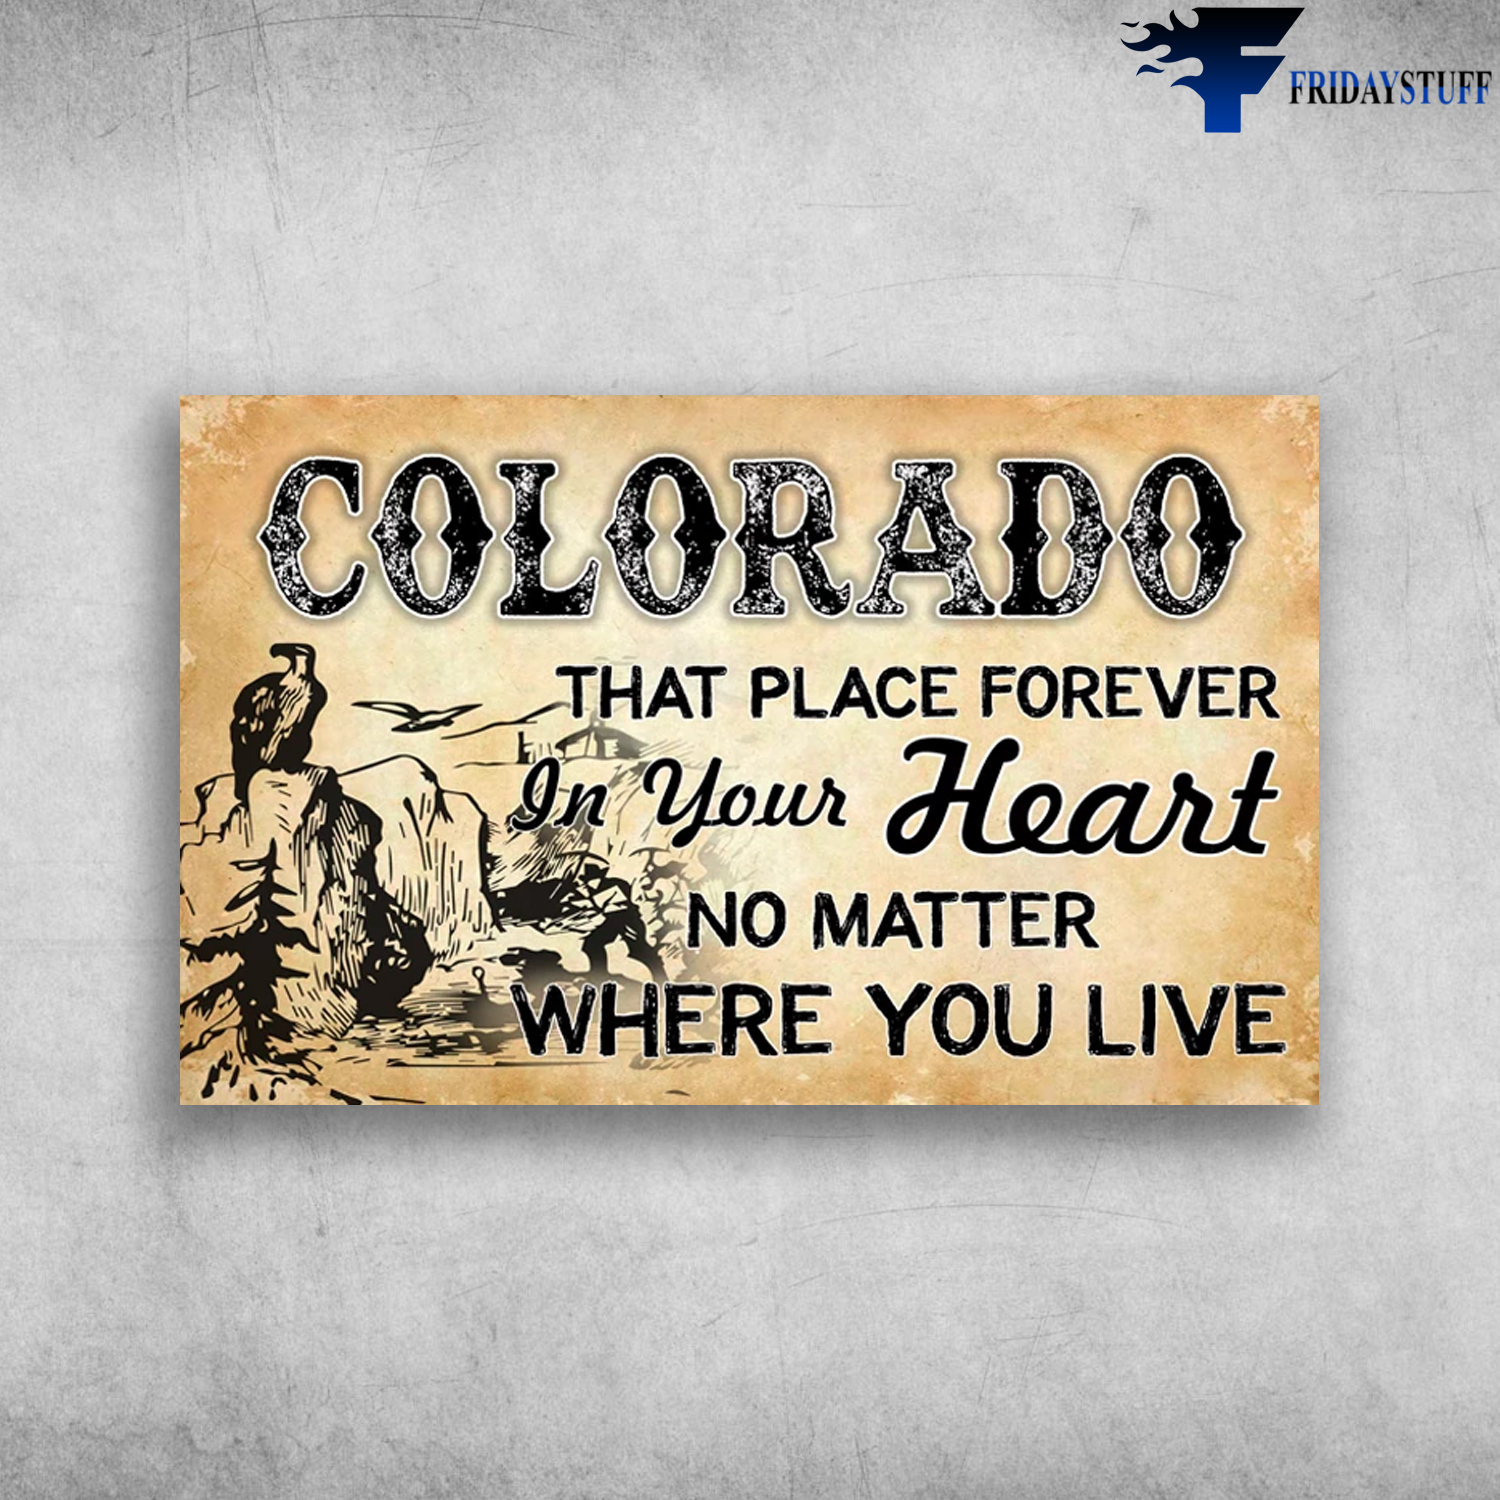 Colorado America That Place Forever In Your Heart